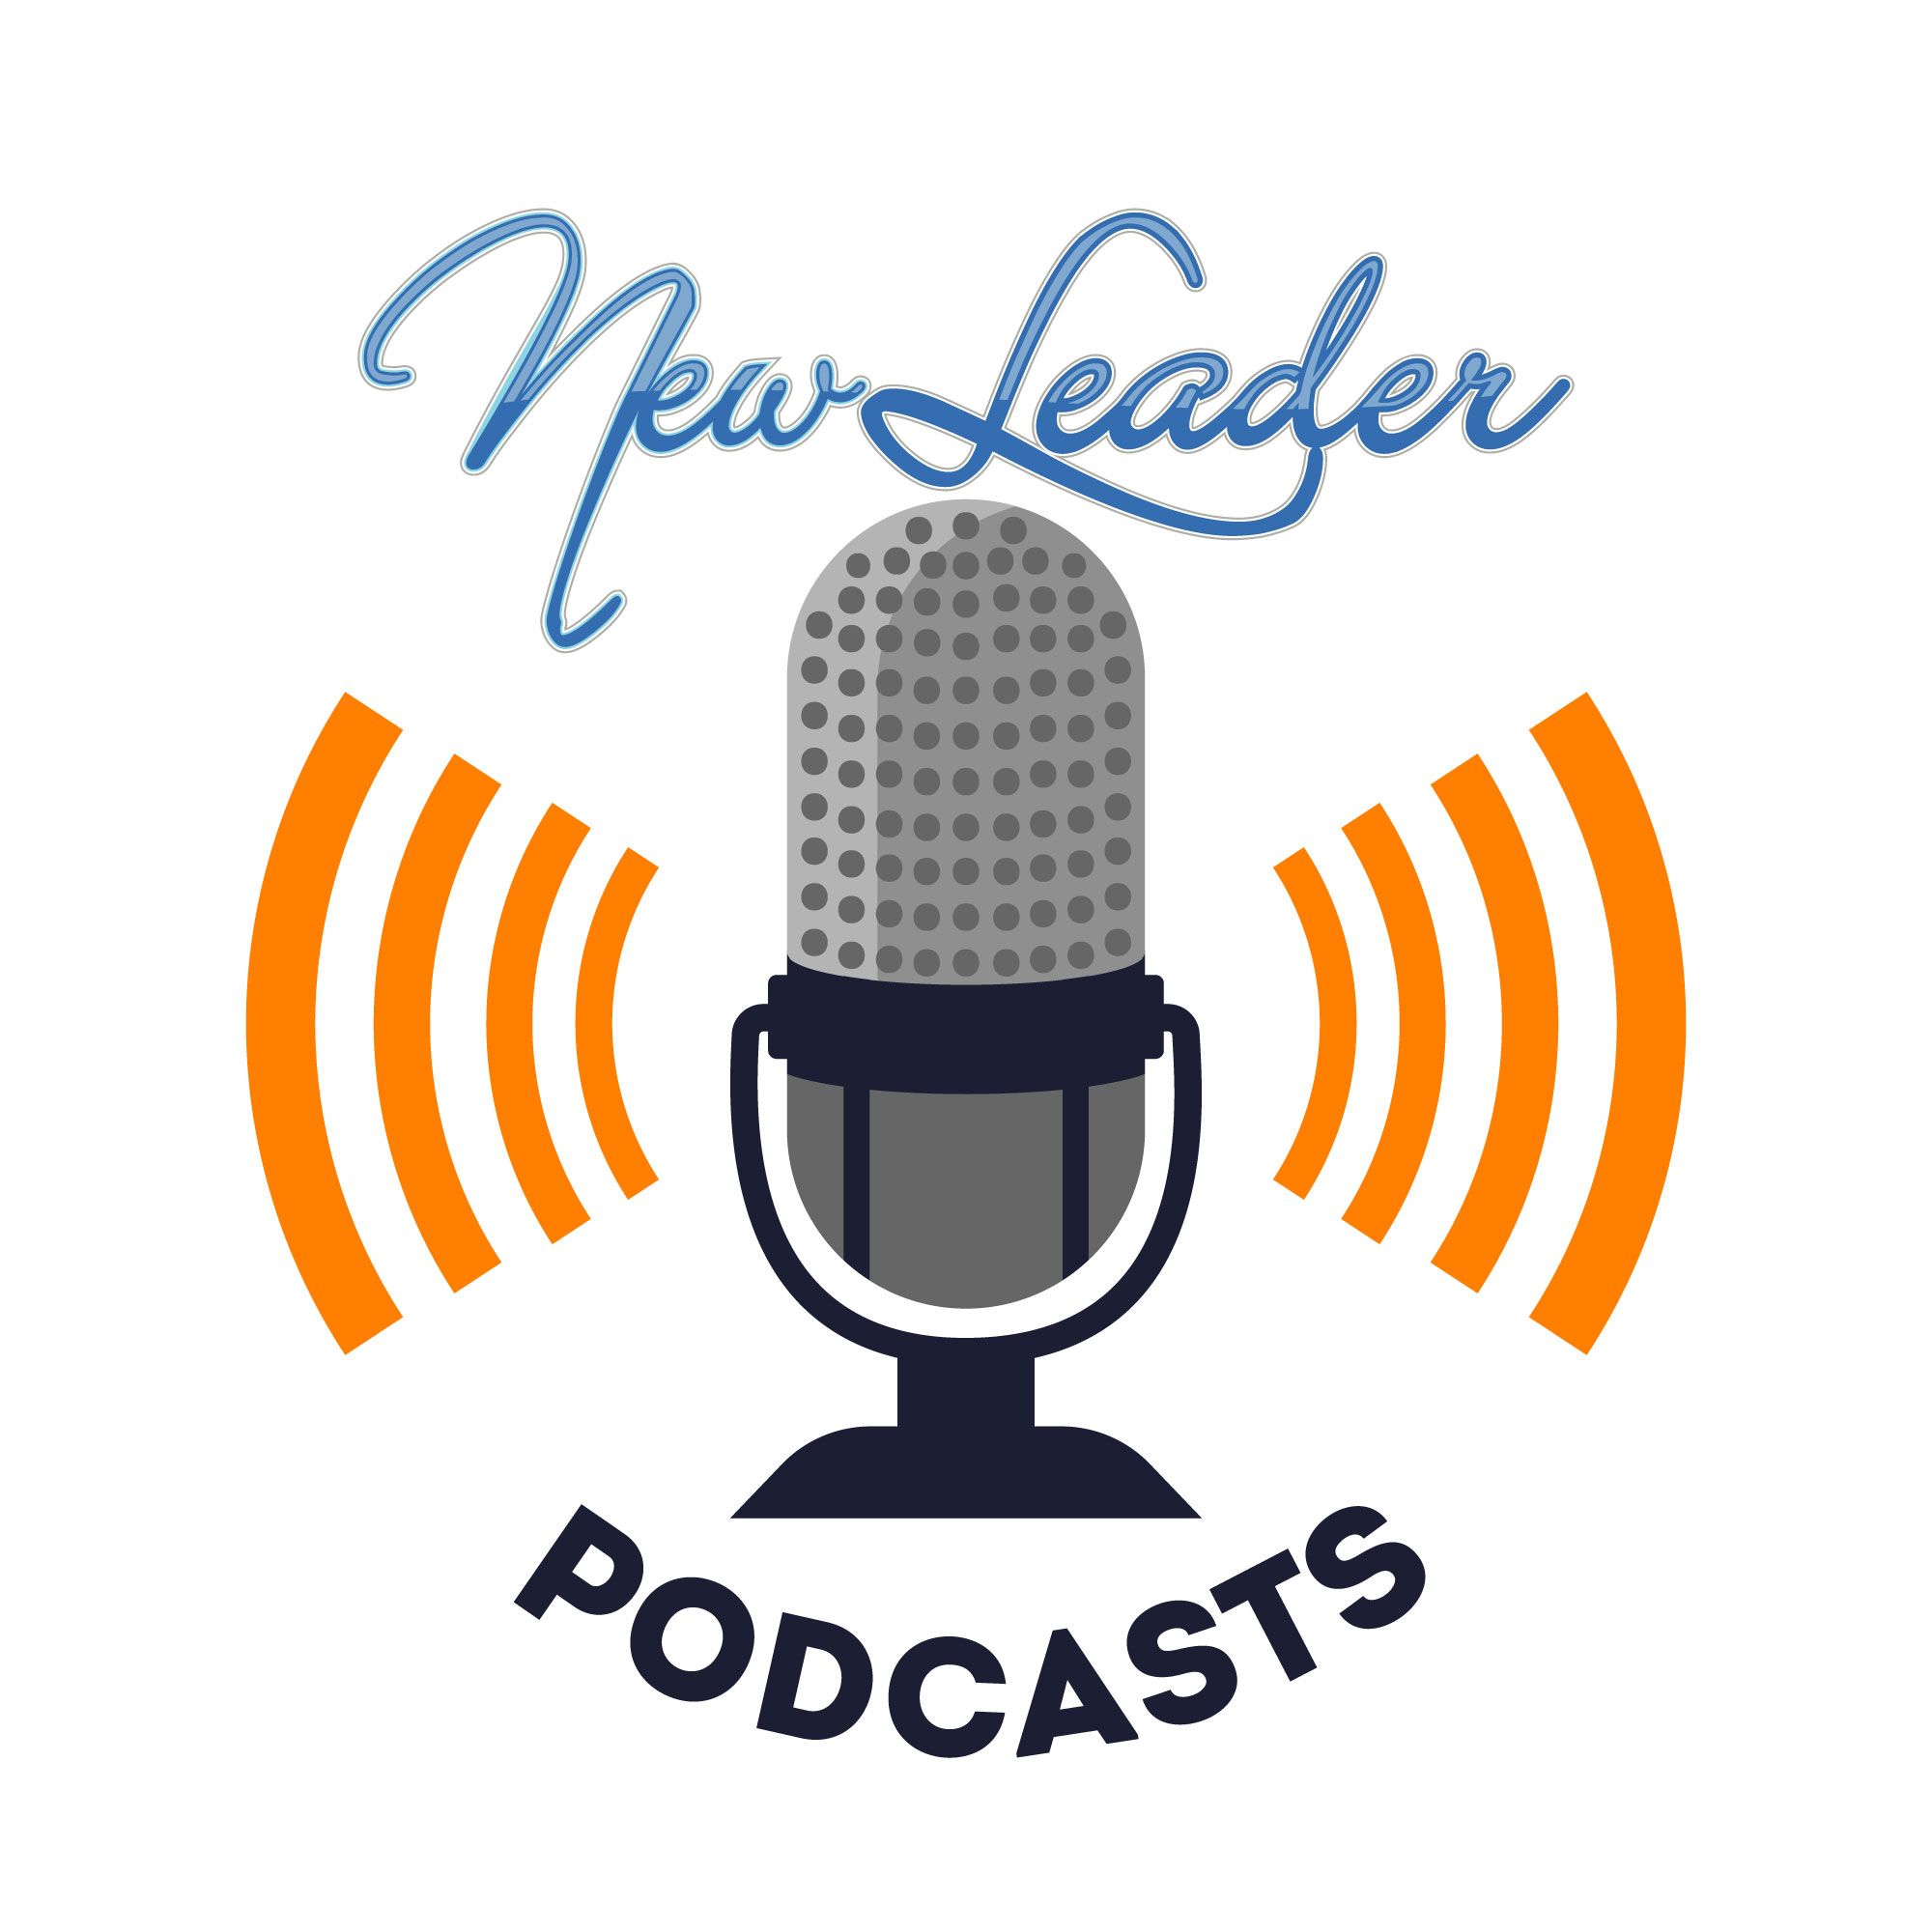 New Leader Podcasts